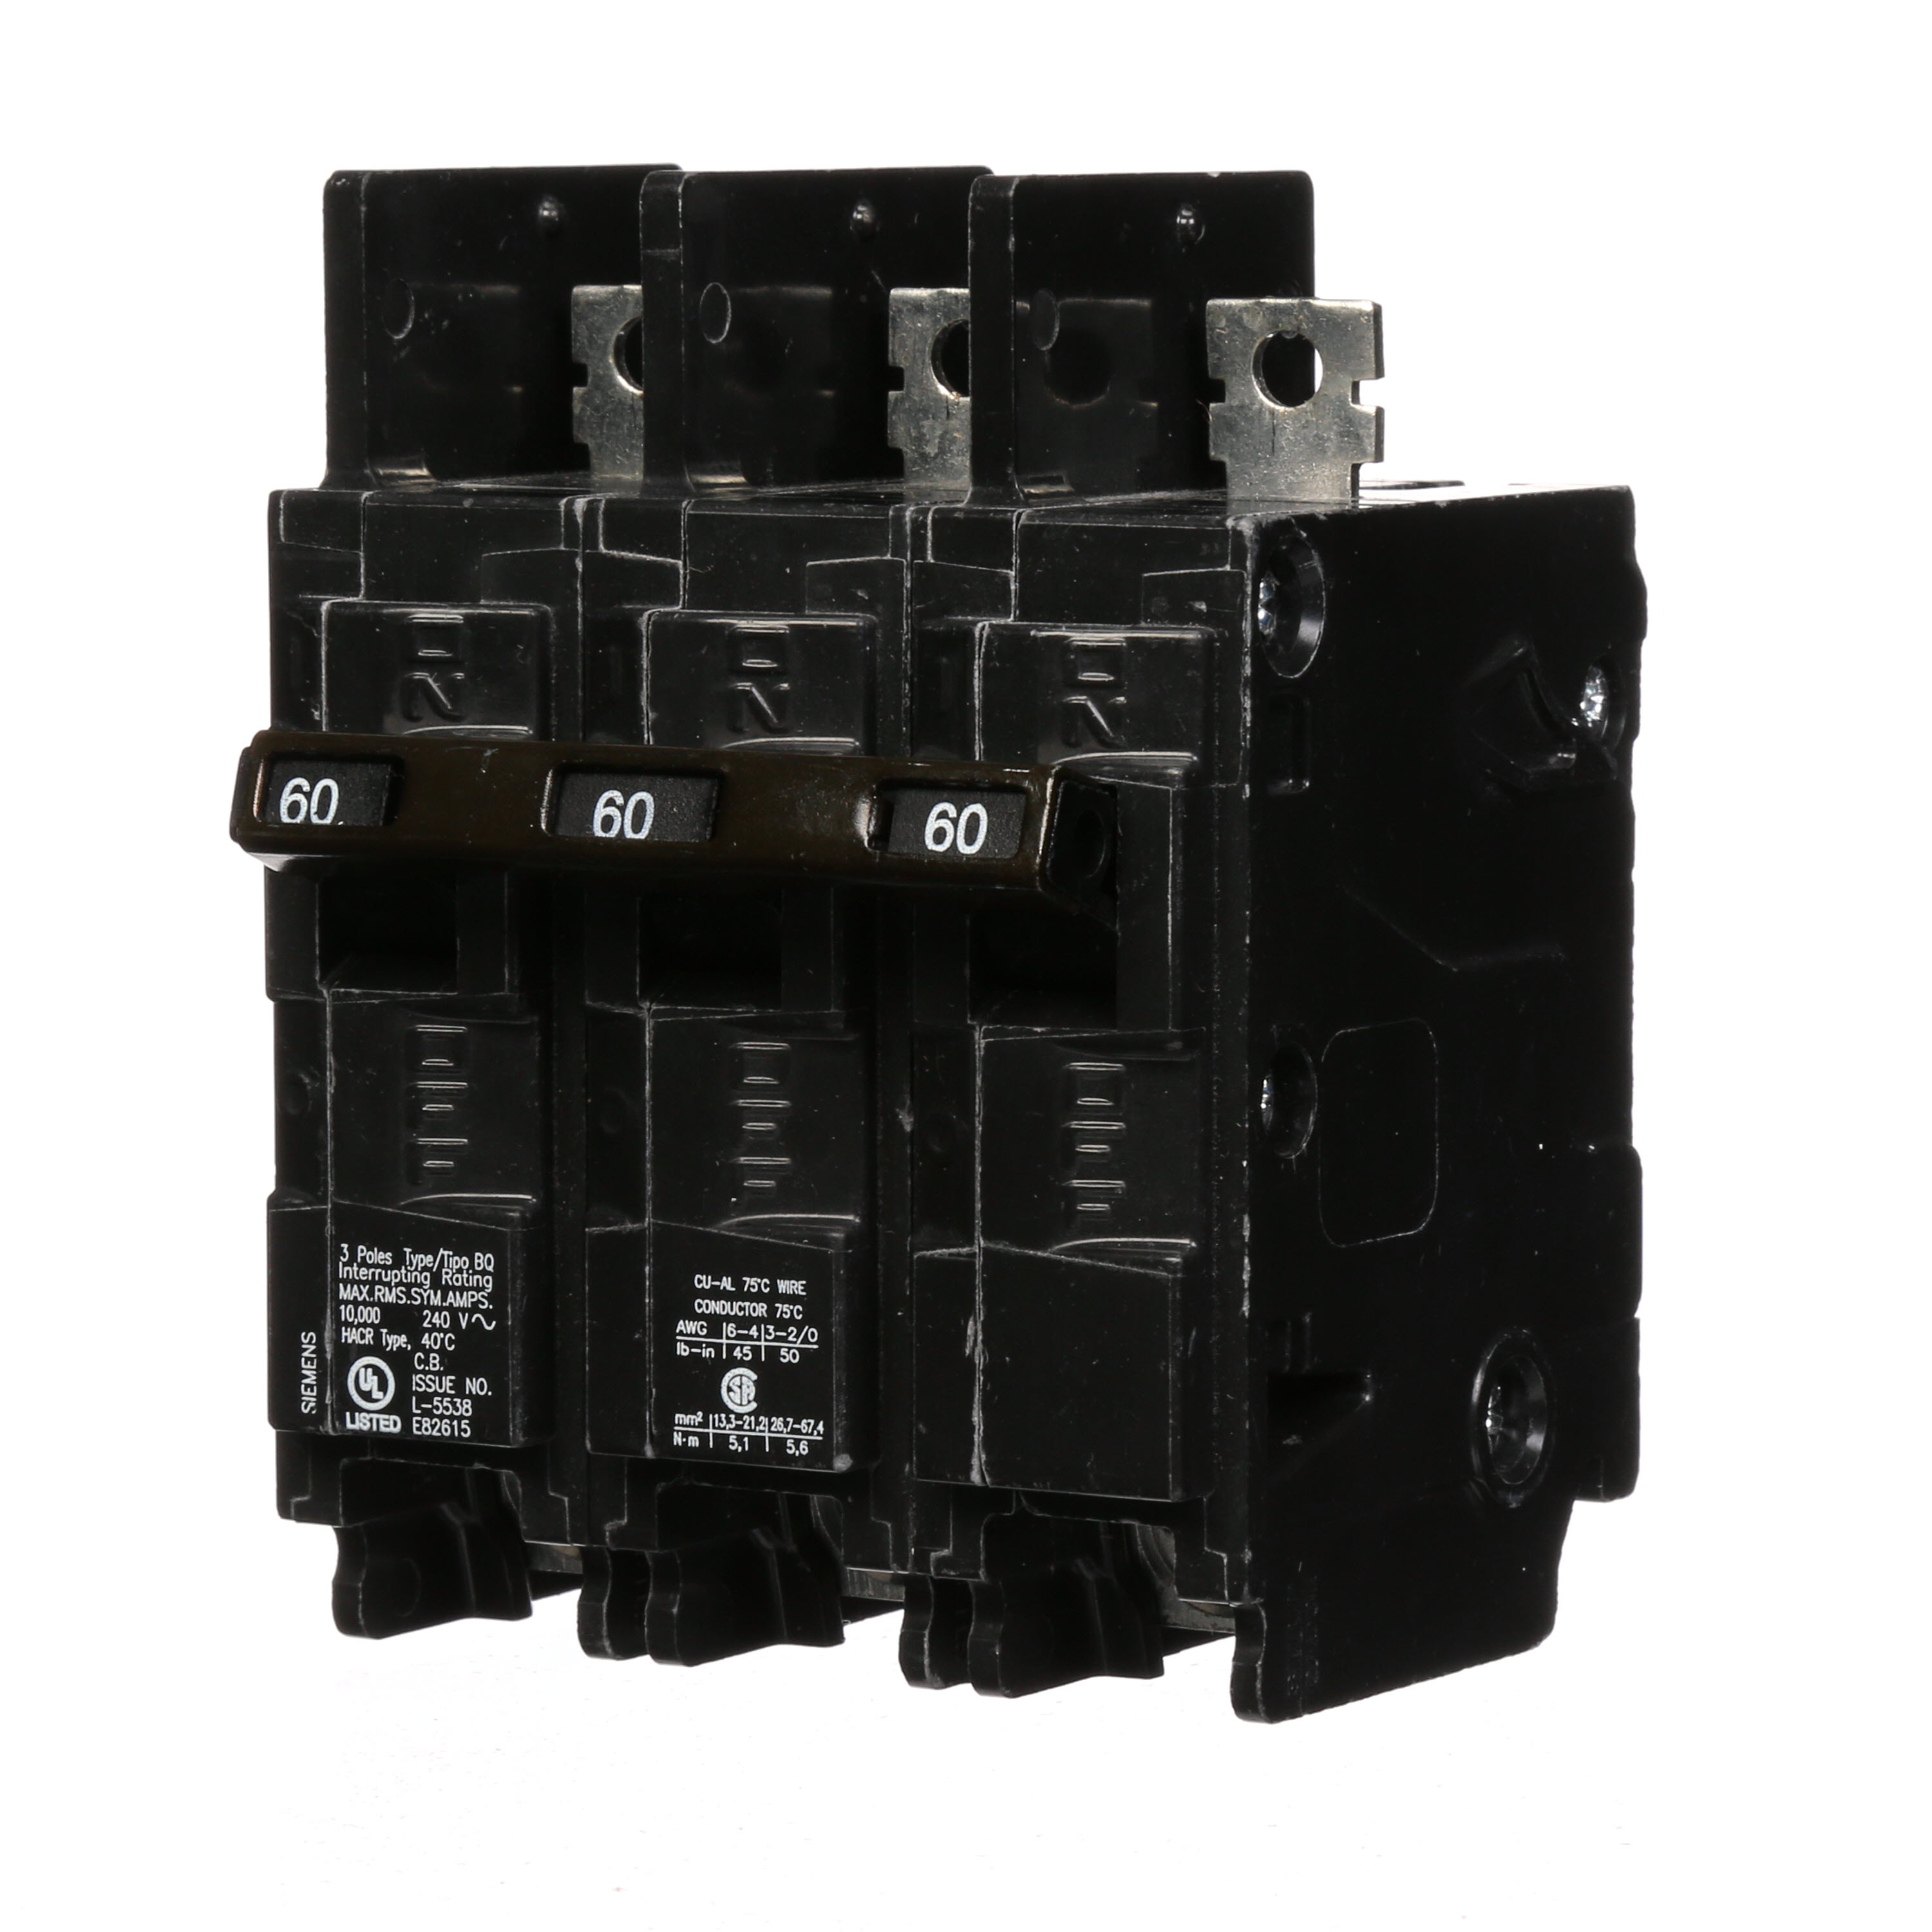 Siemens Low Voltage Molded Case Circuit Breakers General Purpose MCCBs are Circuit Protection Molded Case Circuit Breakers. 3-Pole Common-Trip circuit breaker type BQ. Rated 240V (060A) (AIR 10 kA). Special features Load side lugs are included.